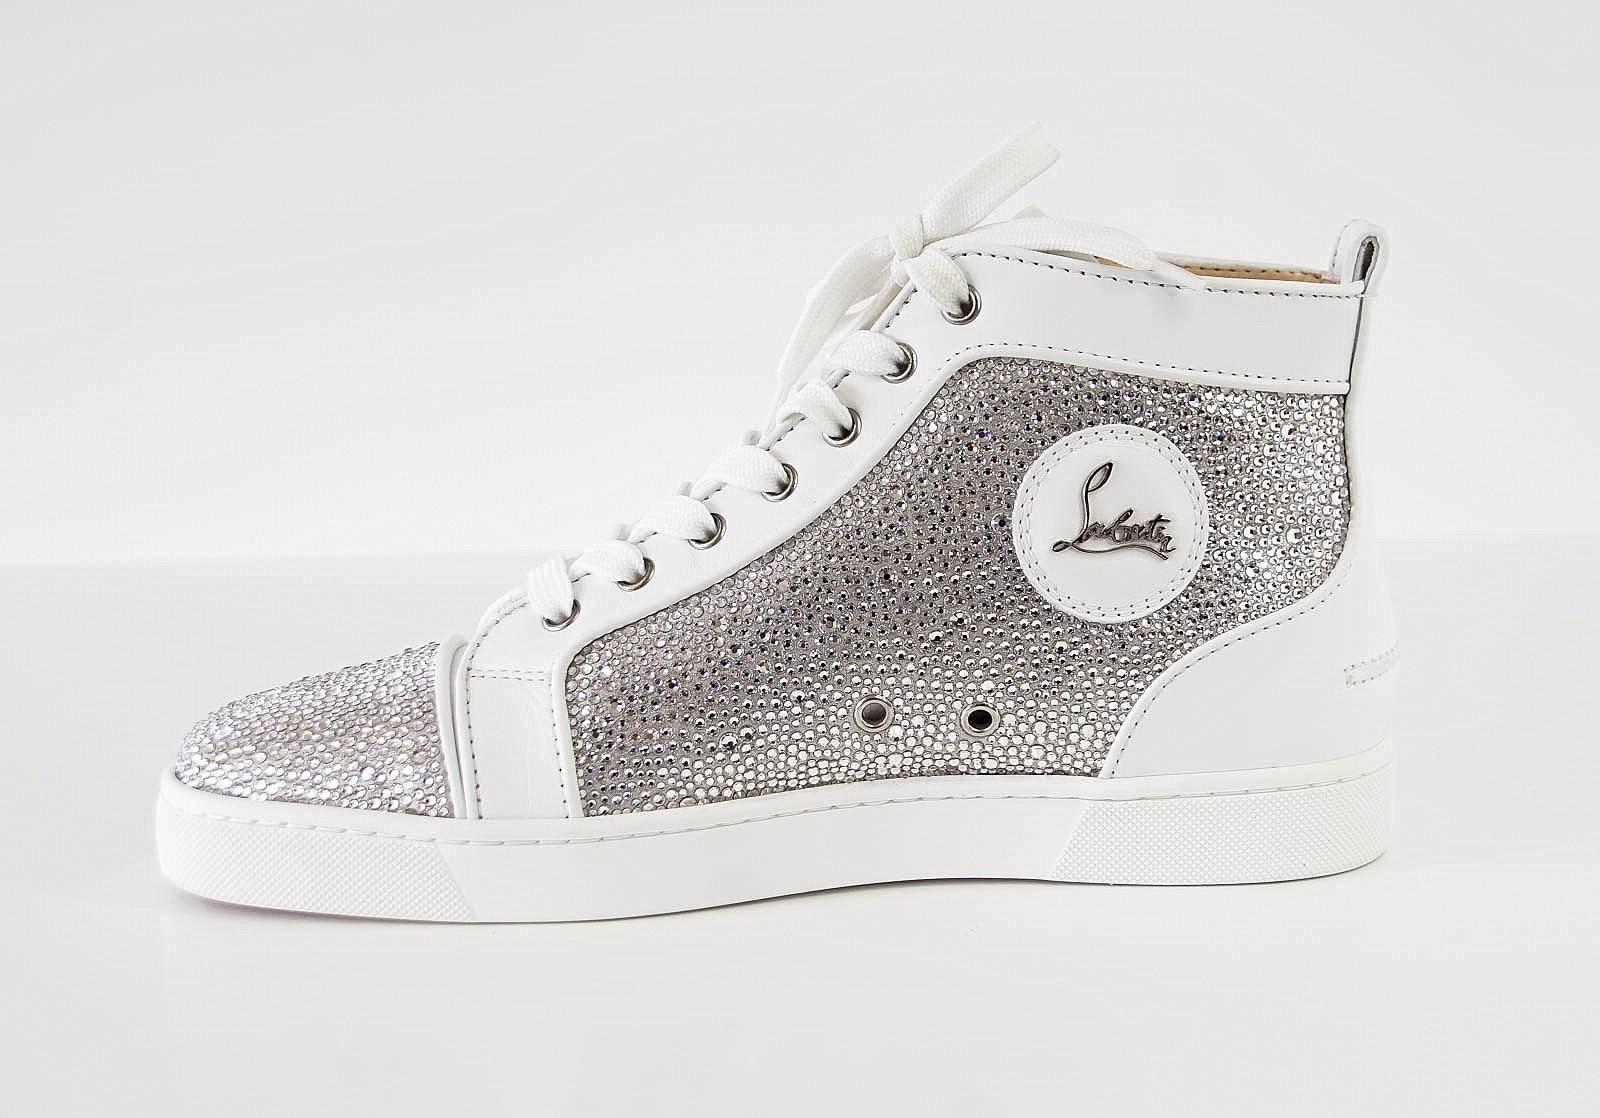 Guaranteed authentic CHRISTIAN LOUBOUTIN striking Louis Flat Diamante sneaker.
Coveted White diamante encrusted sneaker.  
Comes with signature box and sleeper.
NEW or NEVER WORN. 
final sale

SIZE 42
USA SIZE 9

CONDITION:
NEW or NEVER WORN